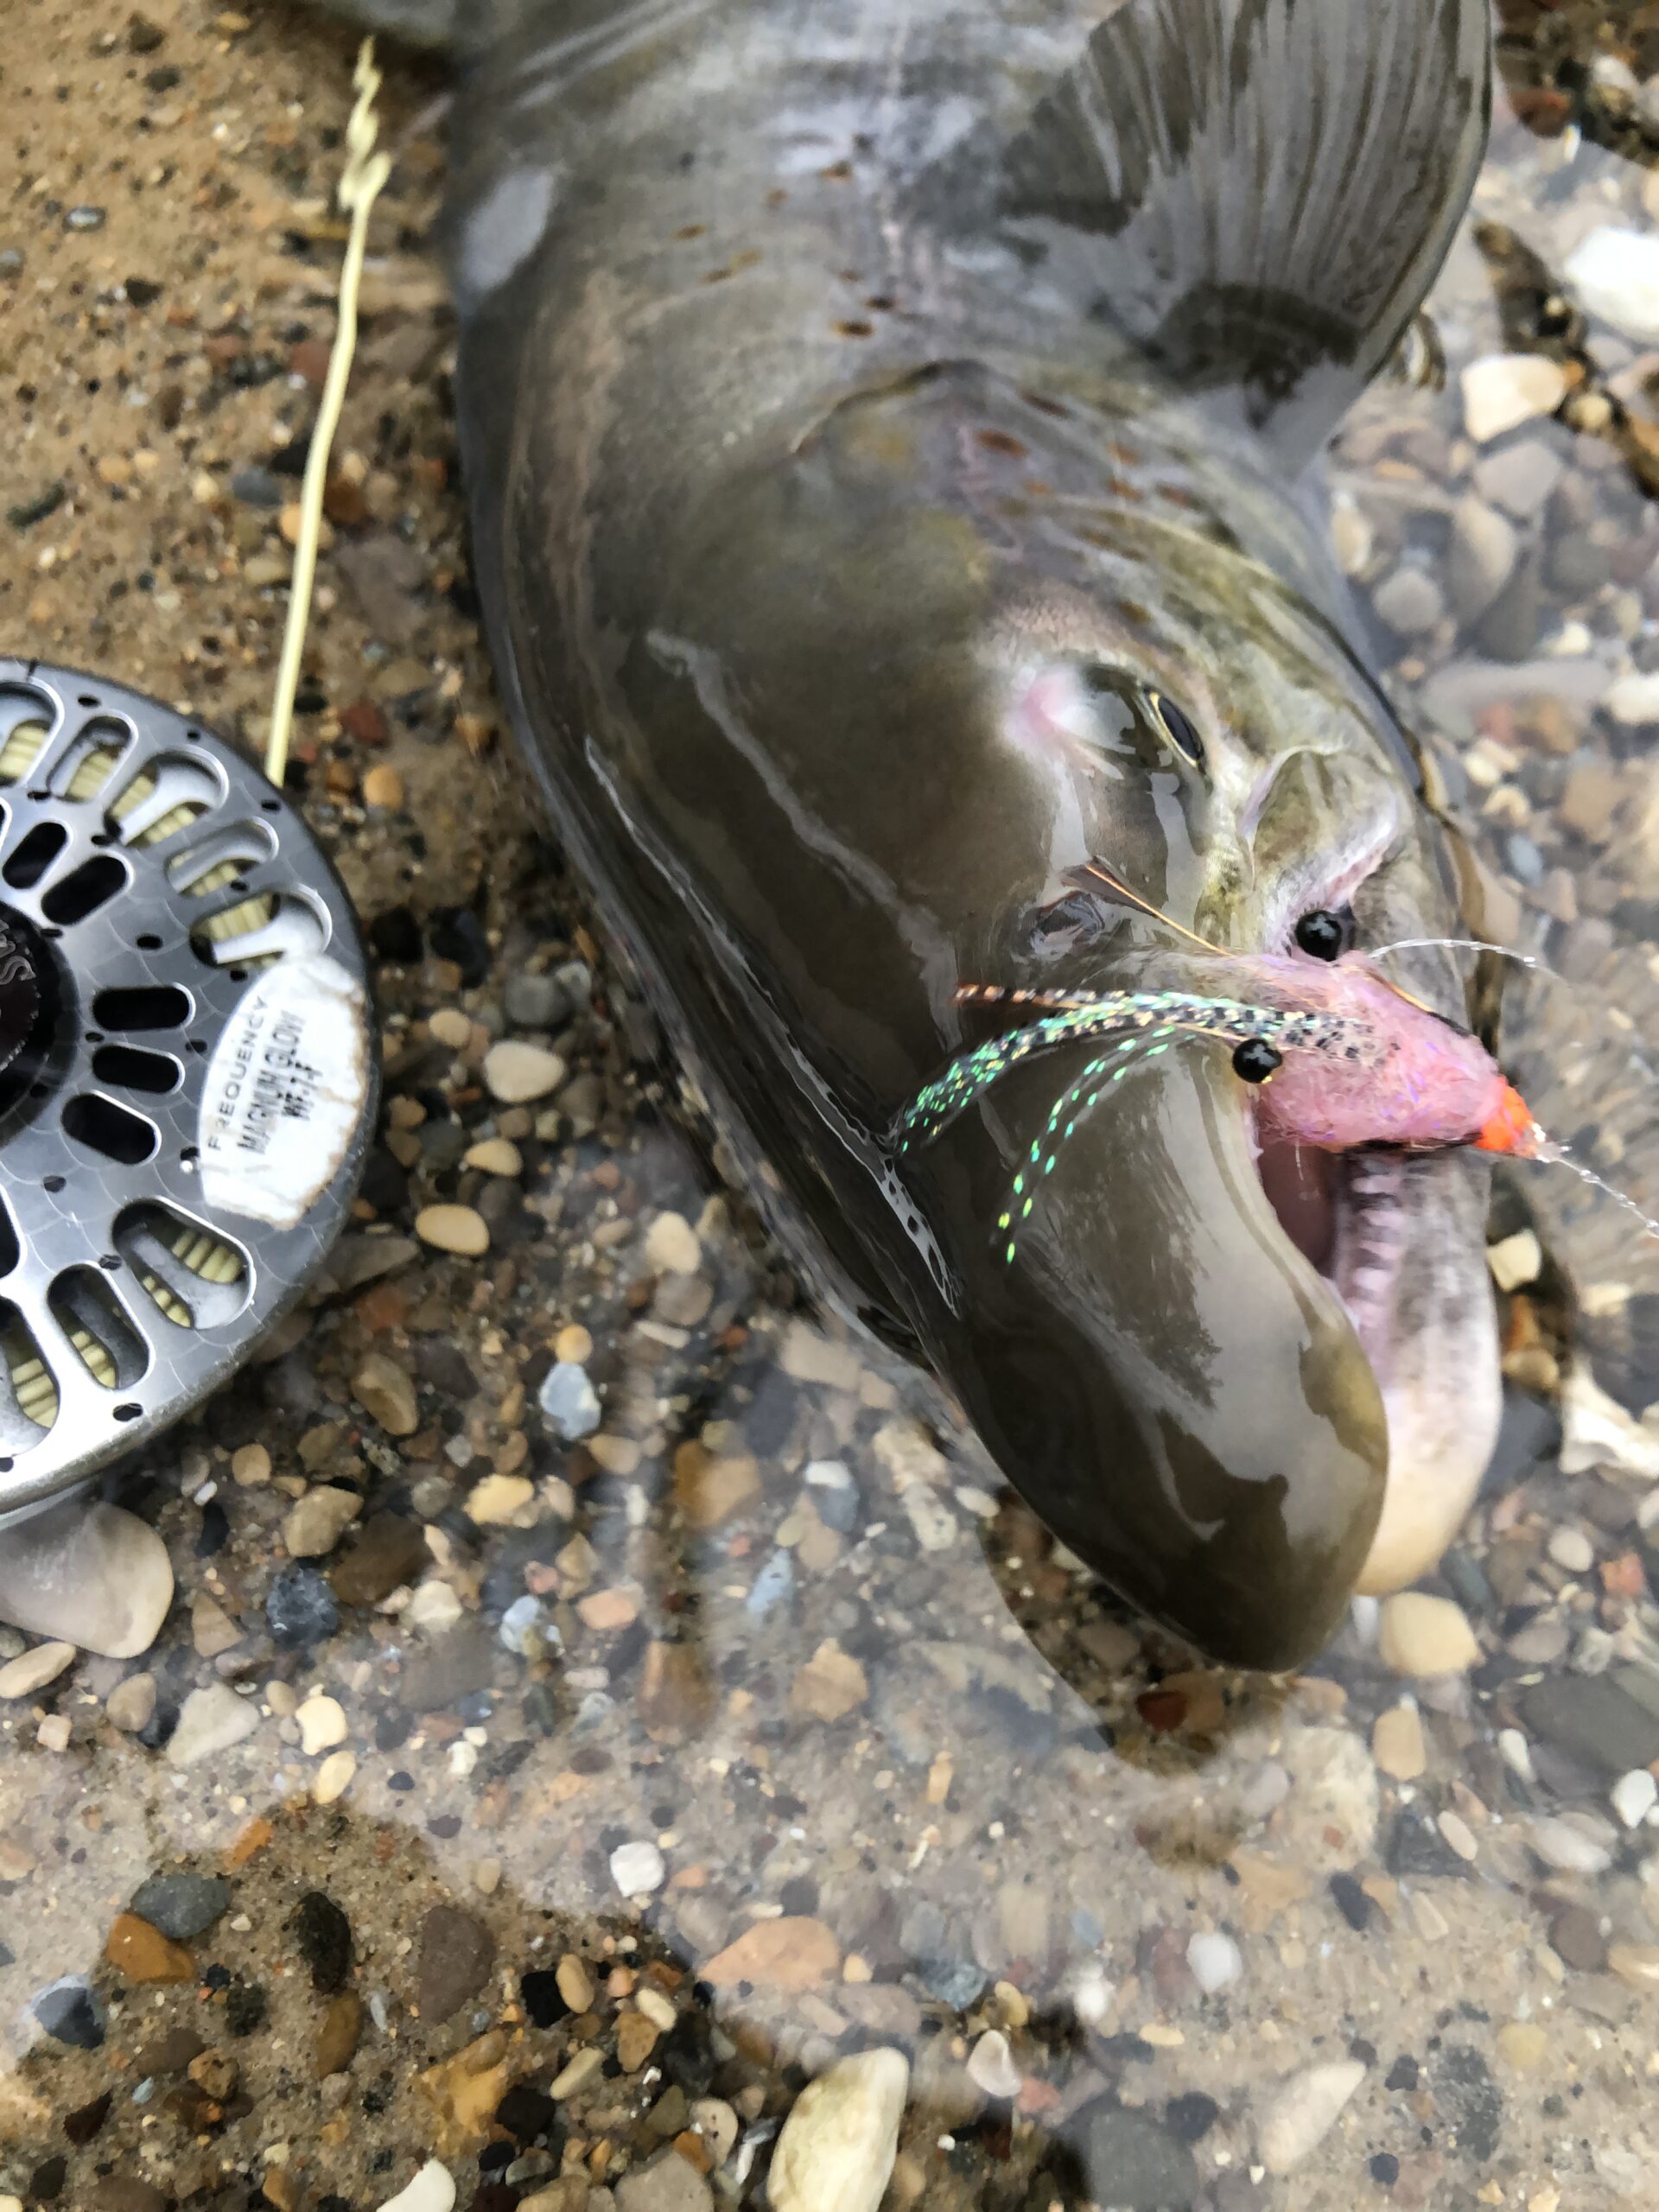 The Attack Mode-How and Why Atlantic Salmon/Steelhead/ Migratory